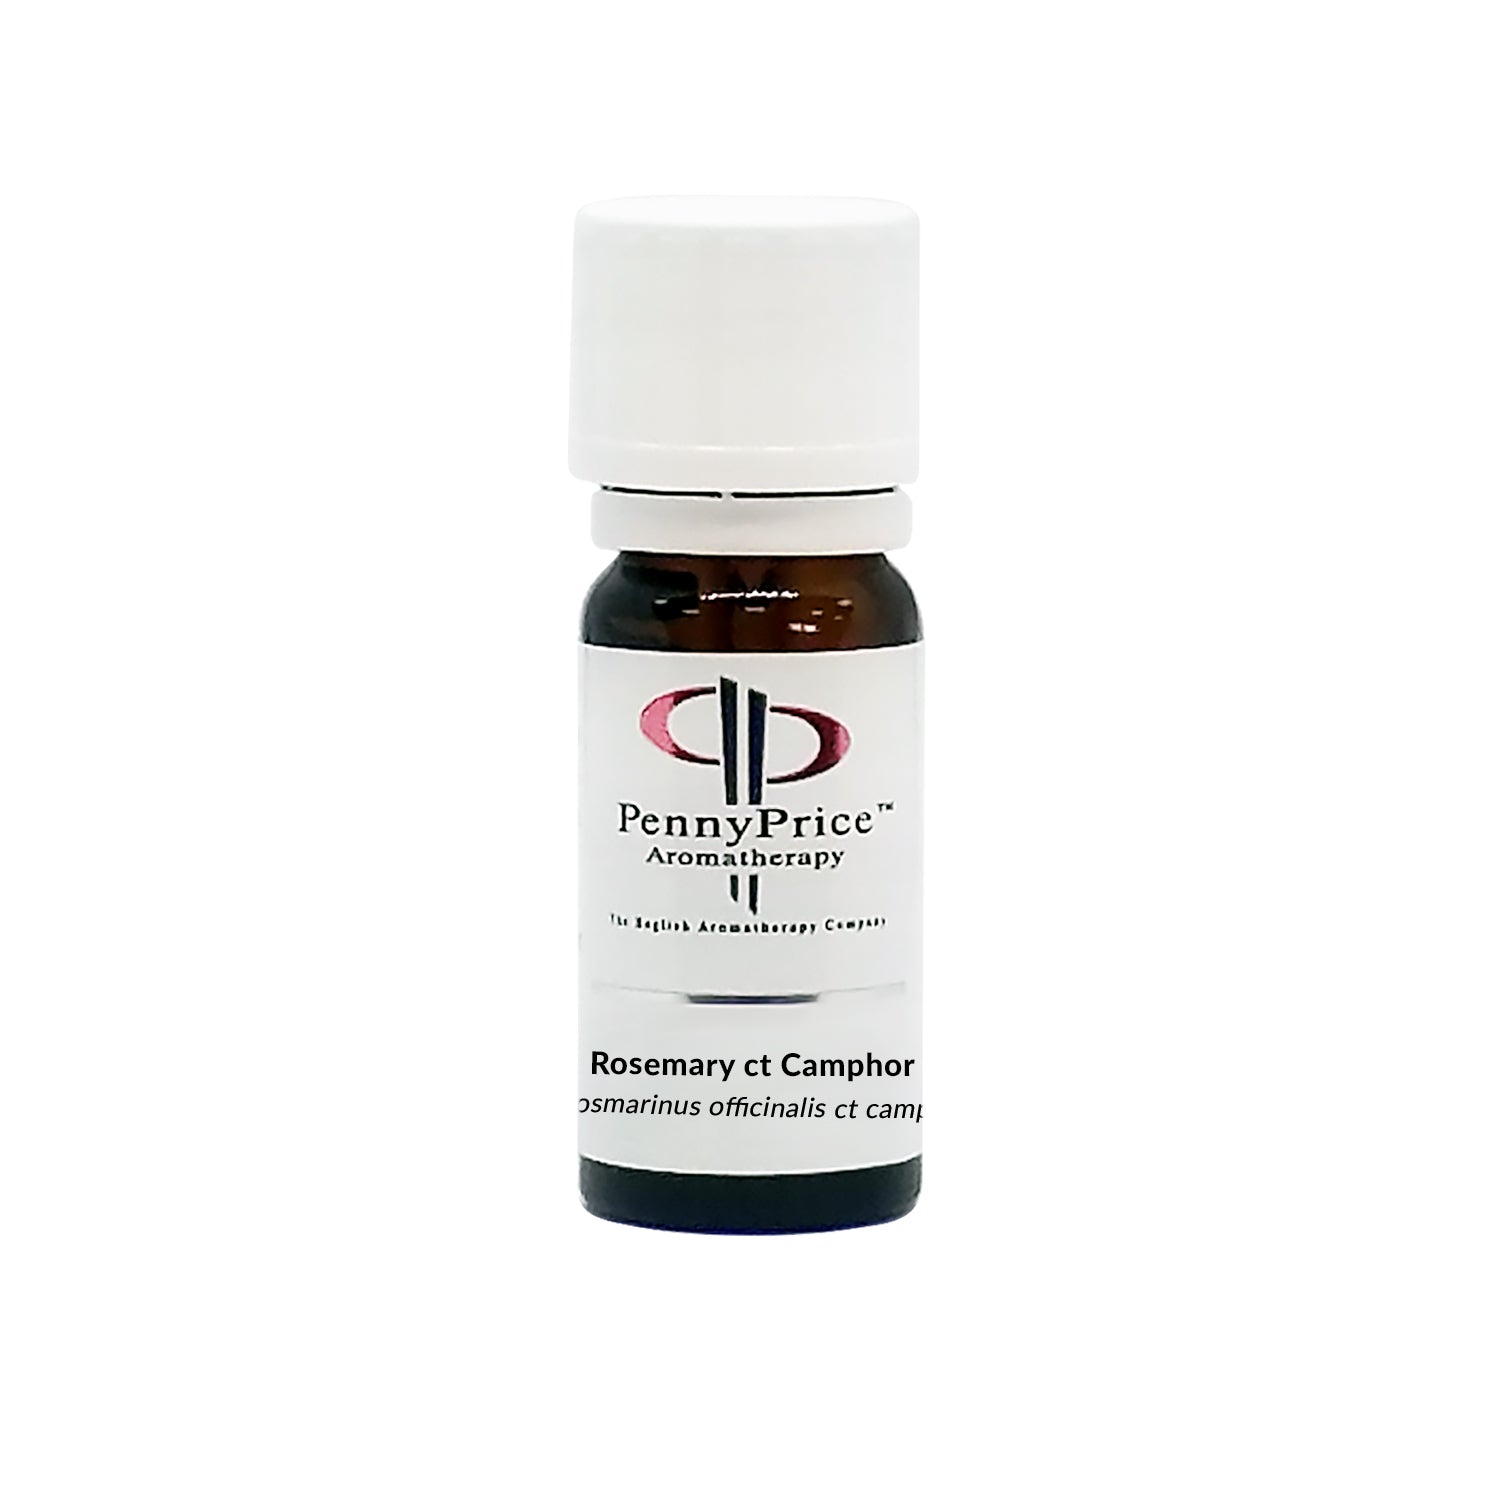 Rosemary ct Camphor Essential Oil